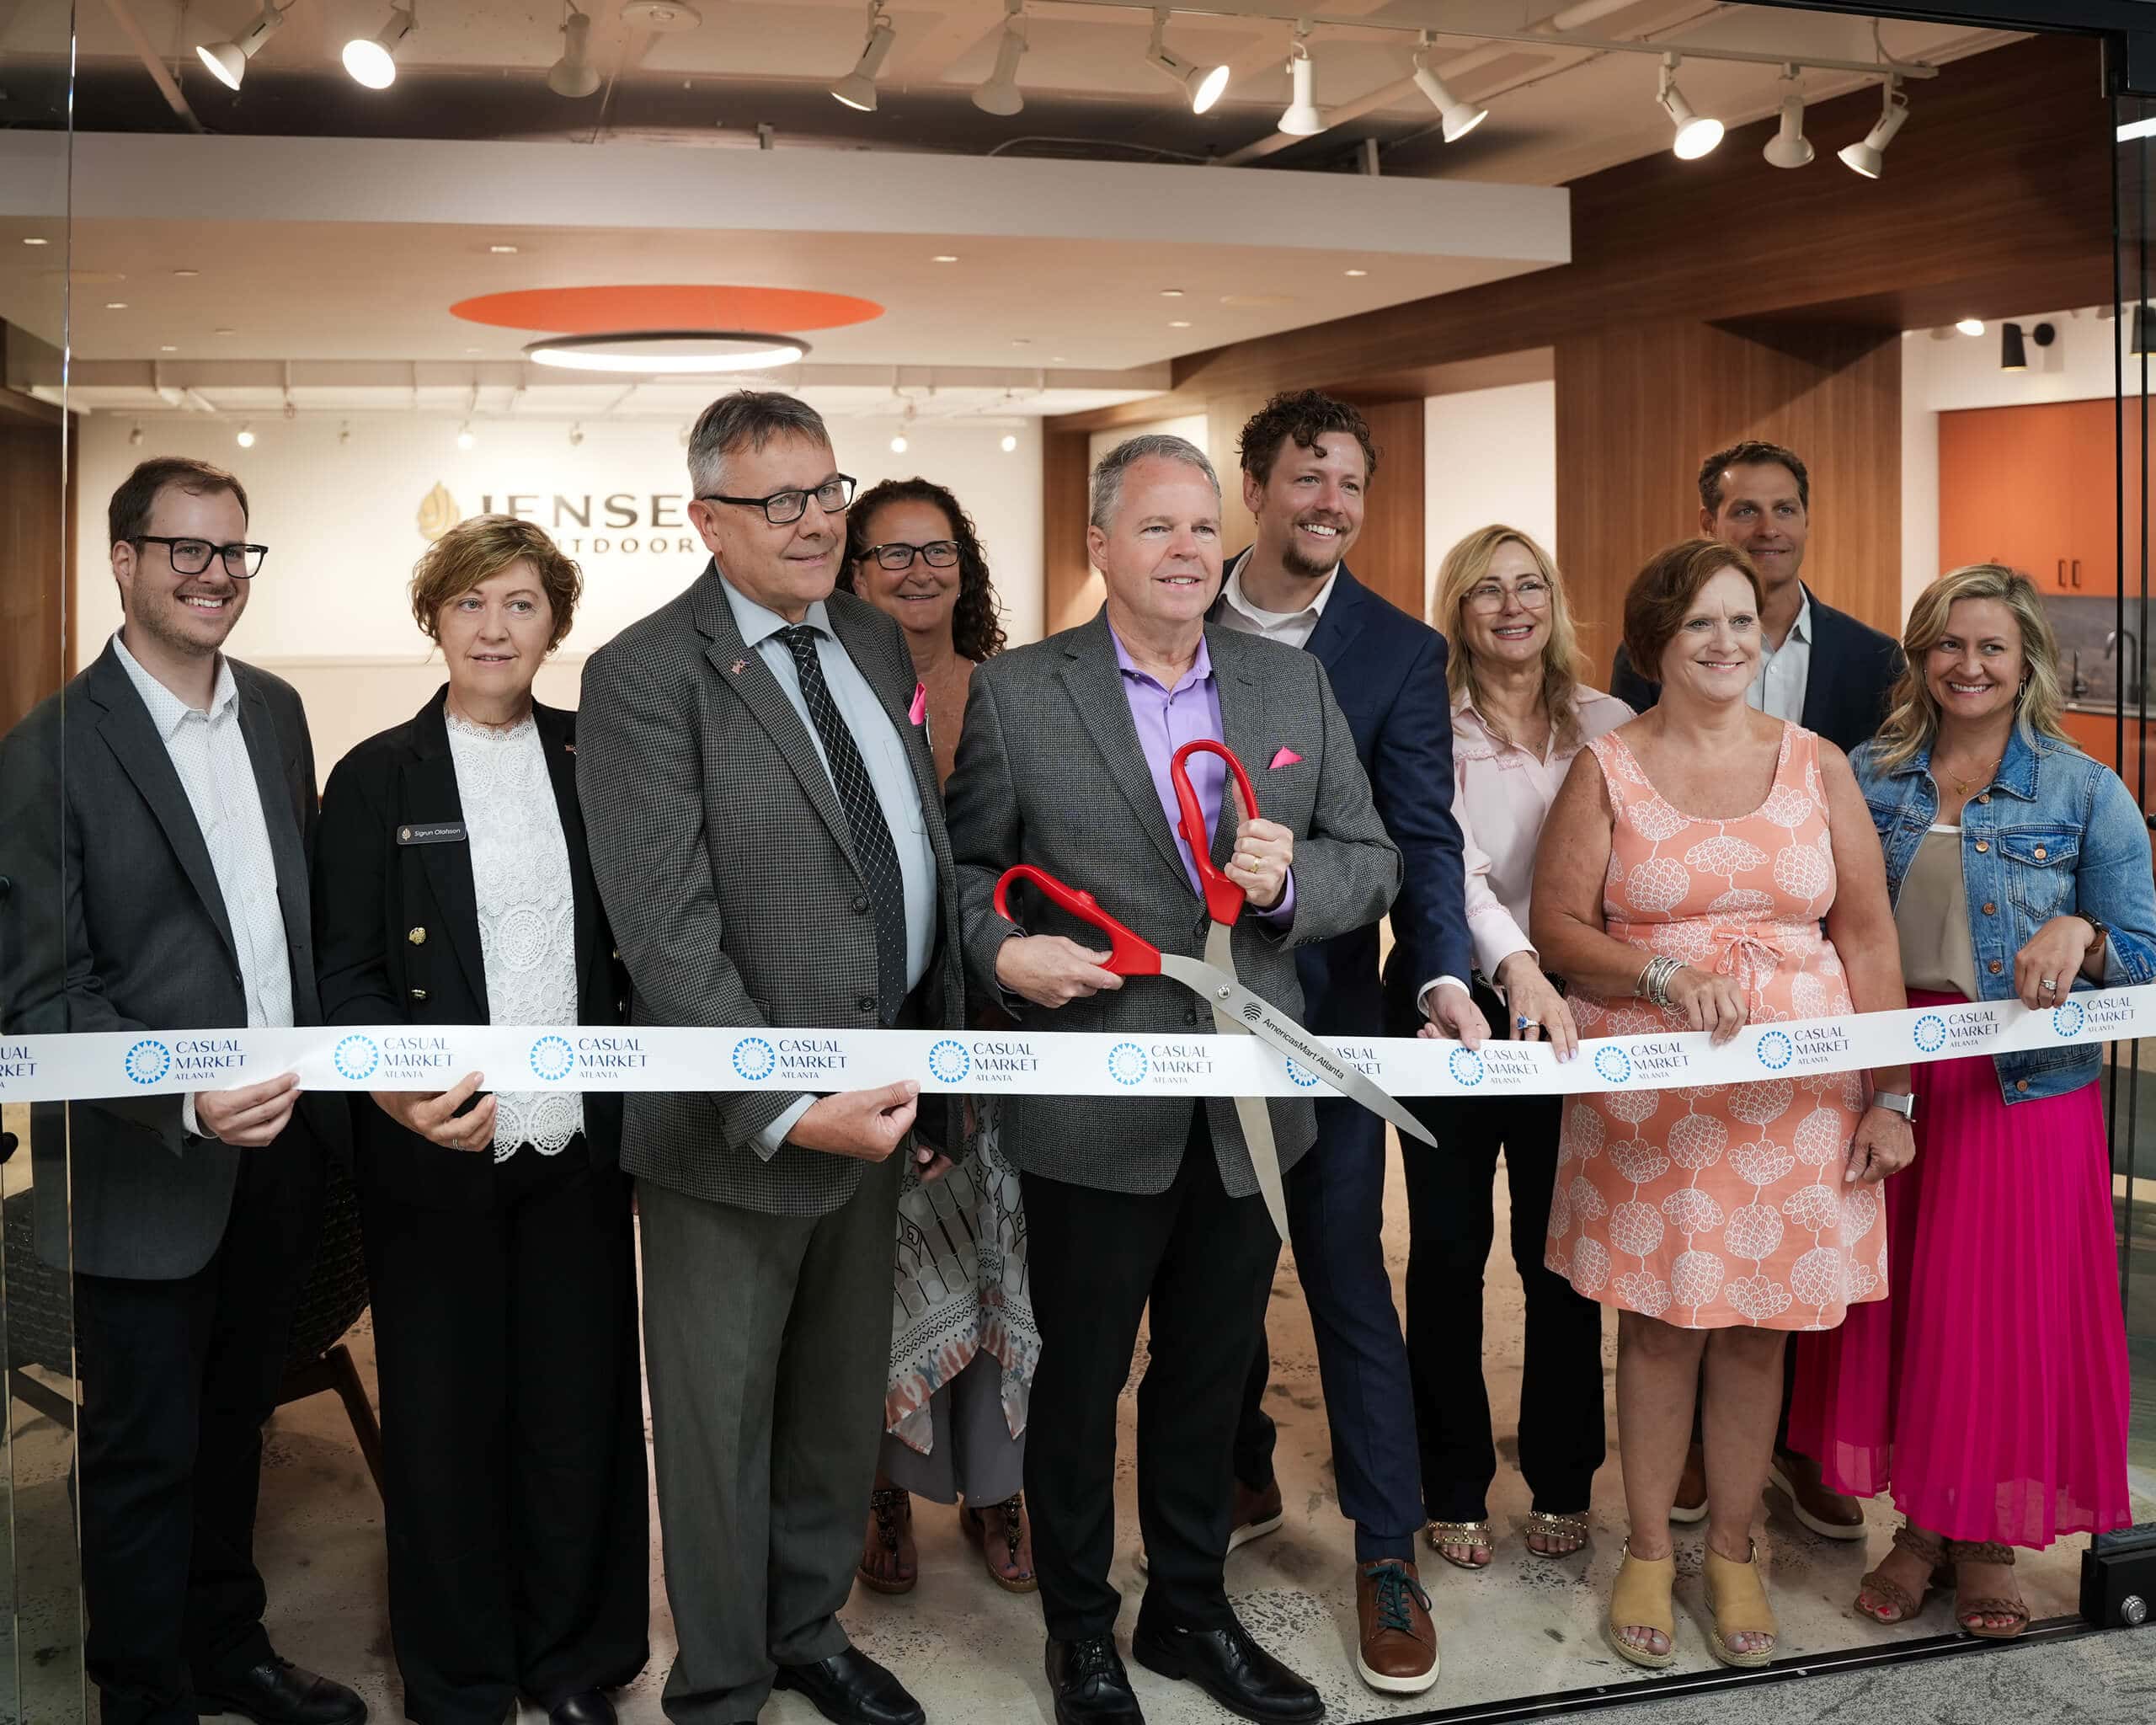 AmericasMart Atlanta Hosts Grand Opening of World’s Largest Collection of Jensen Outdoor Furniture